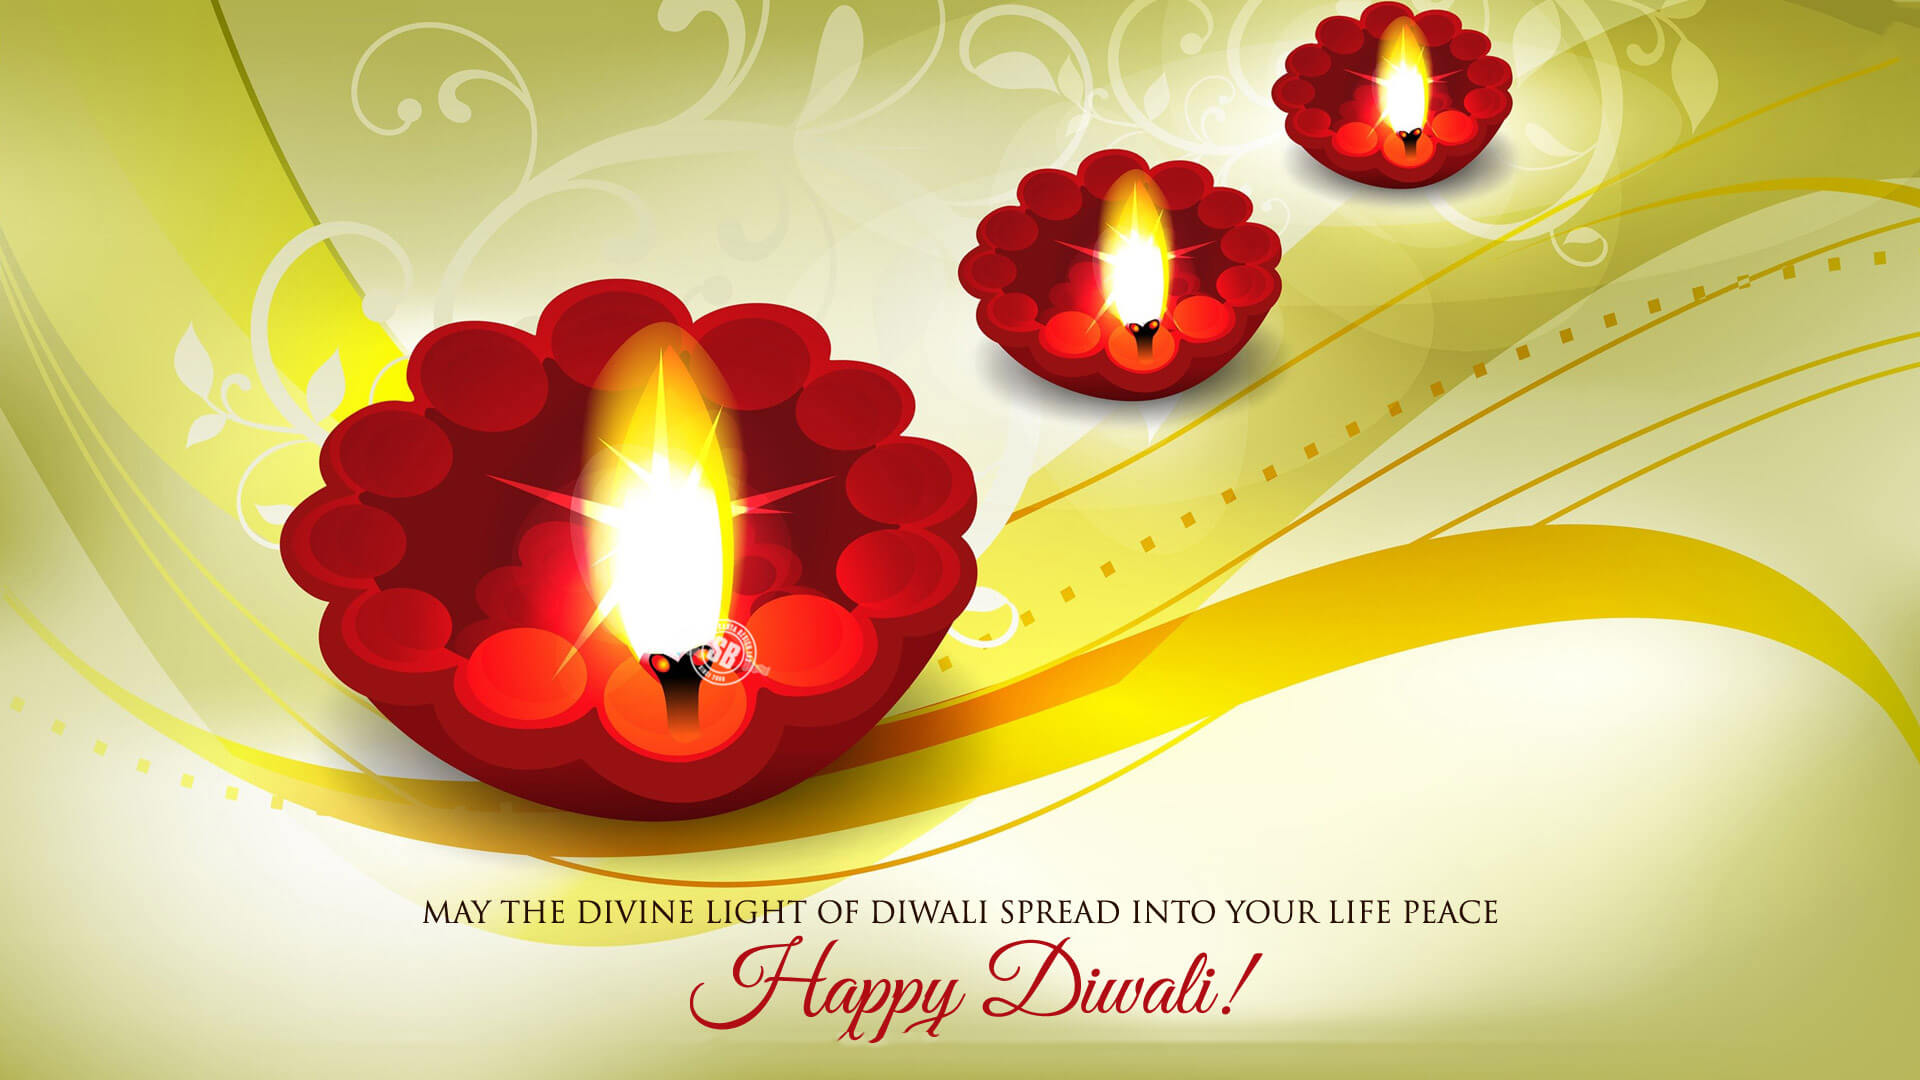 30+ A Beautiful Collection of Diwali Wallpapers & Greetings Cards | CGfrog